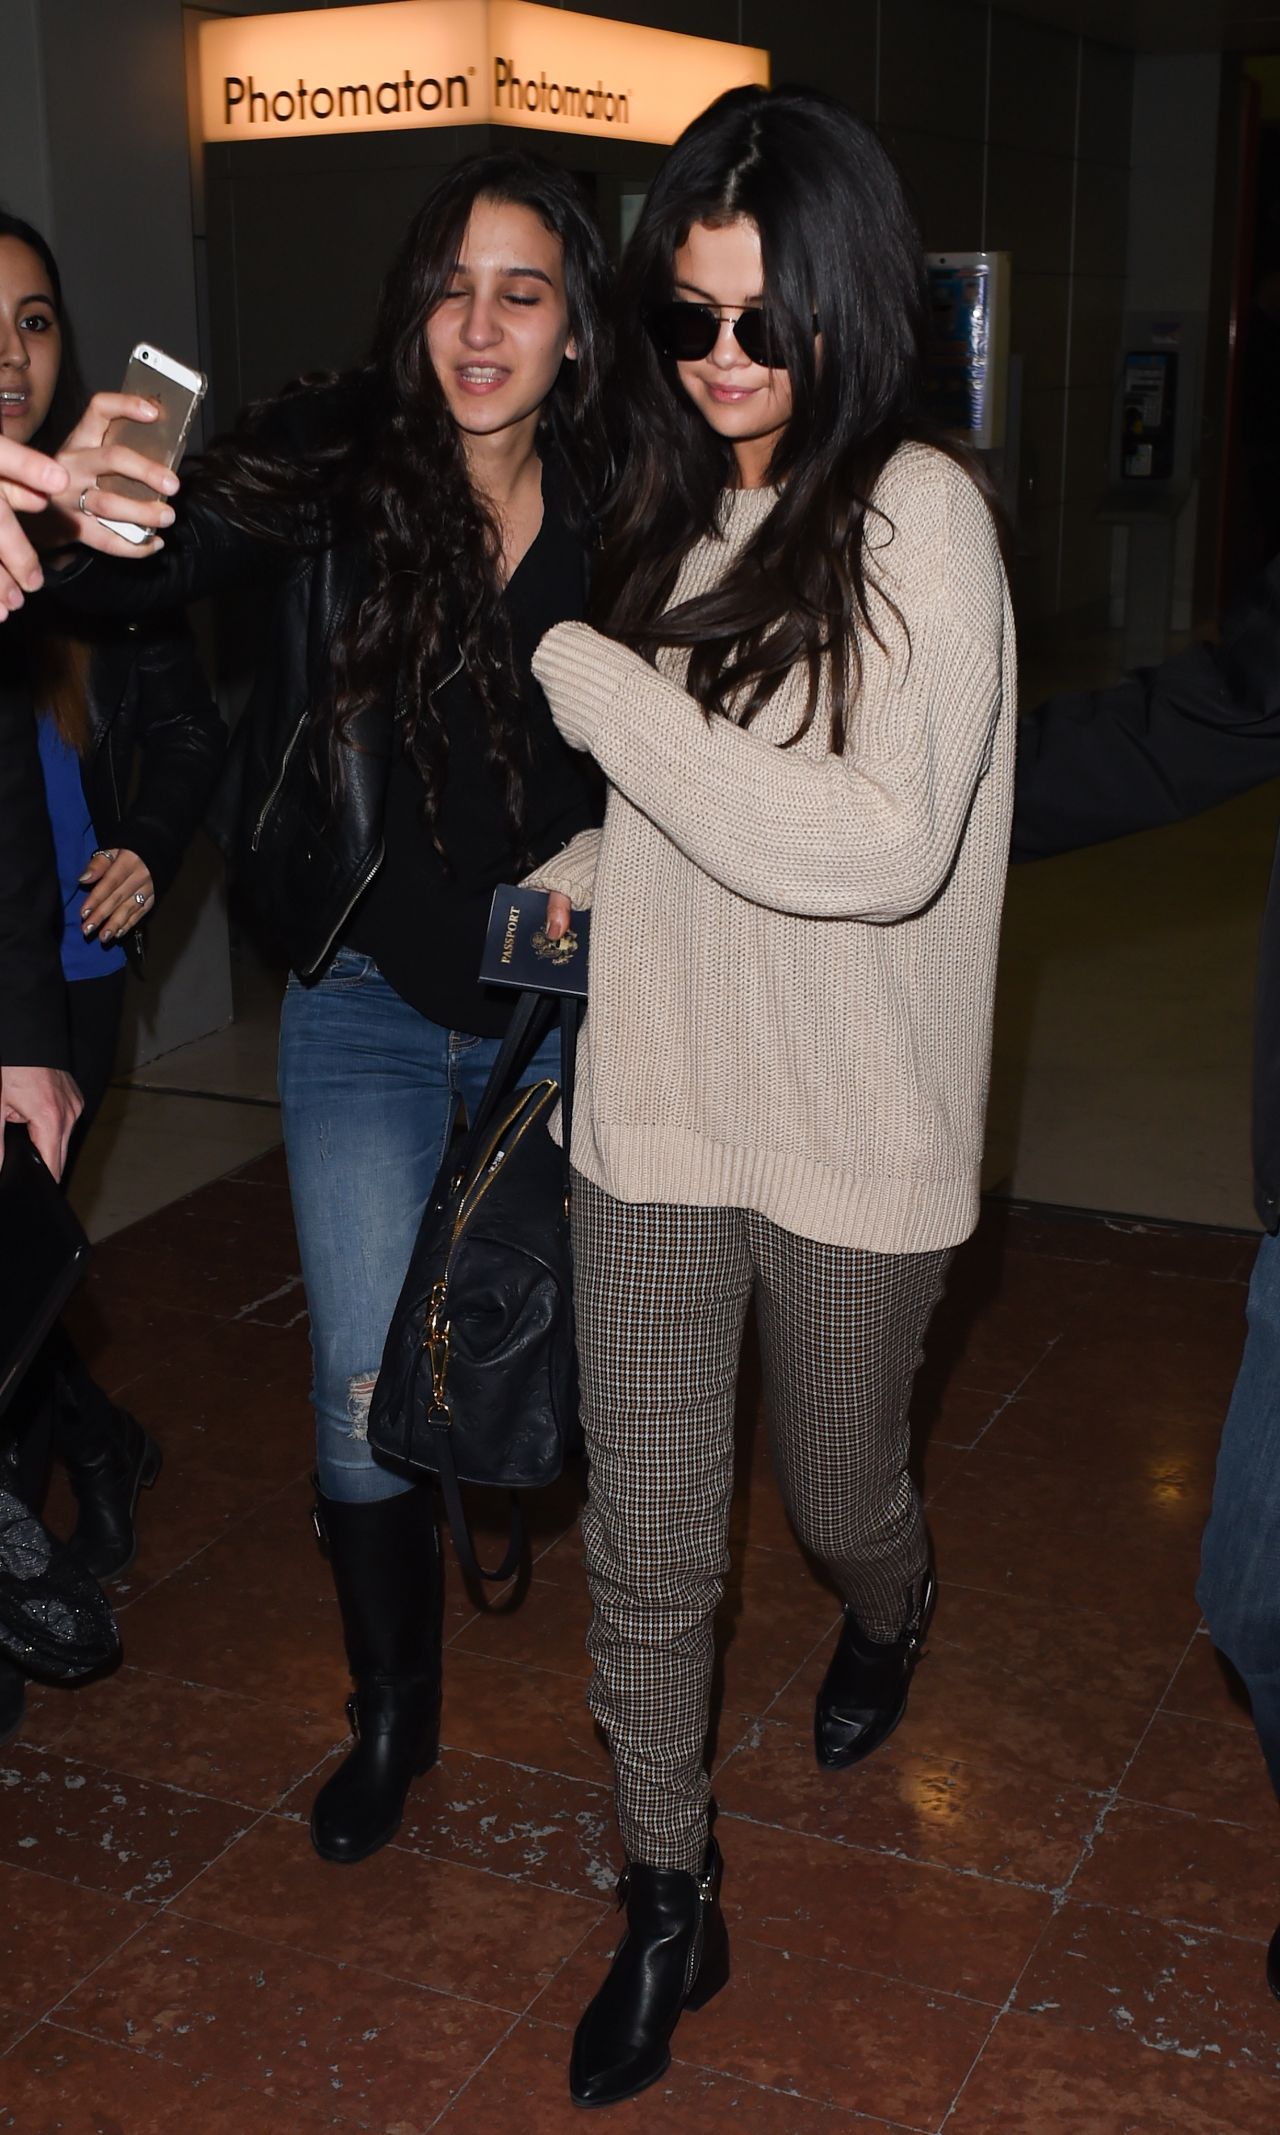 Selena Gomez Charles De Gaulle Airport March 12, 2015 – Star Style